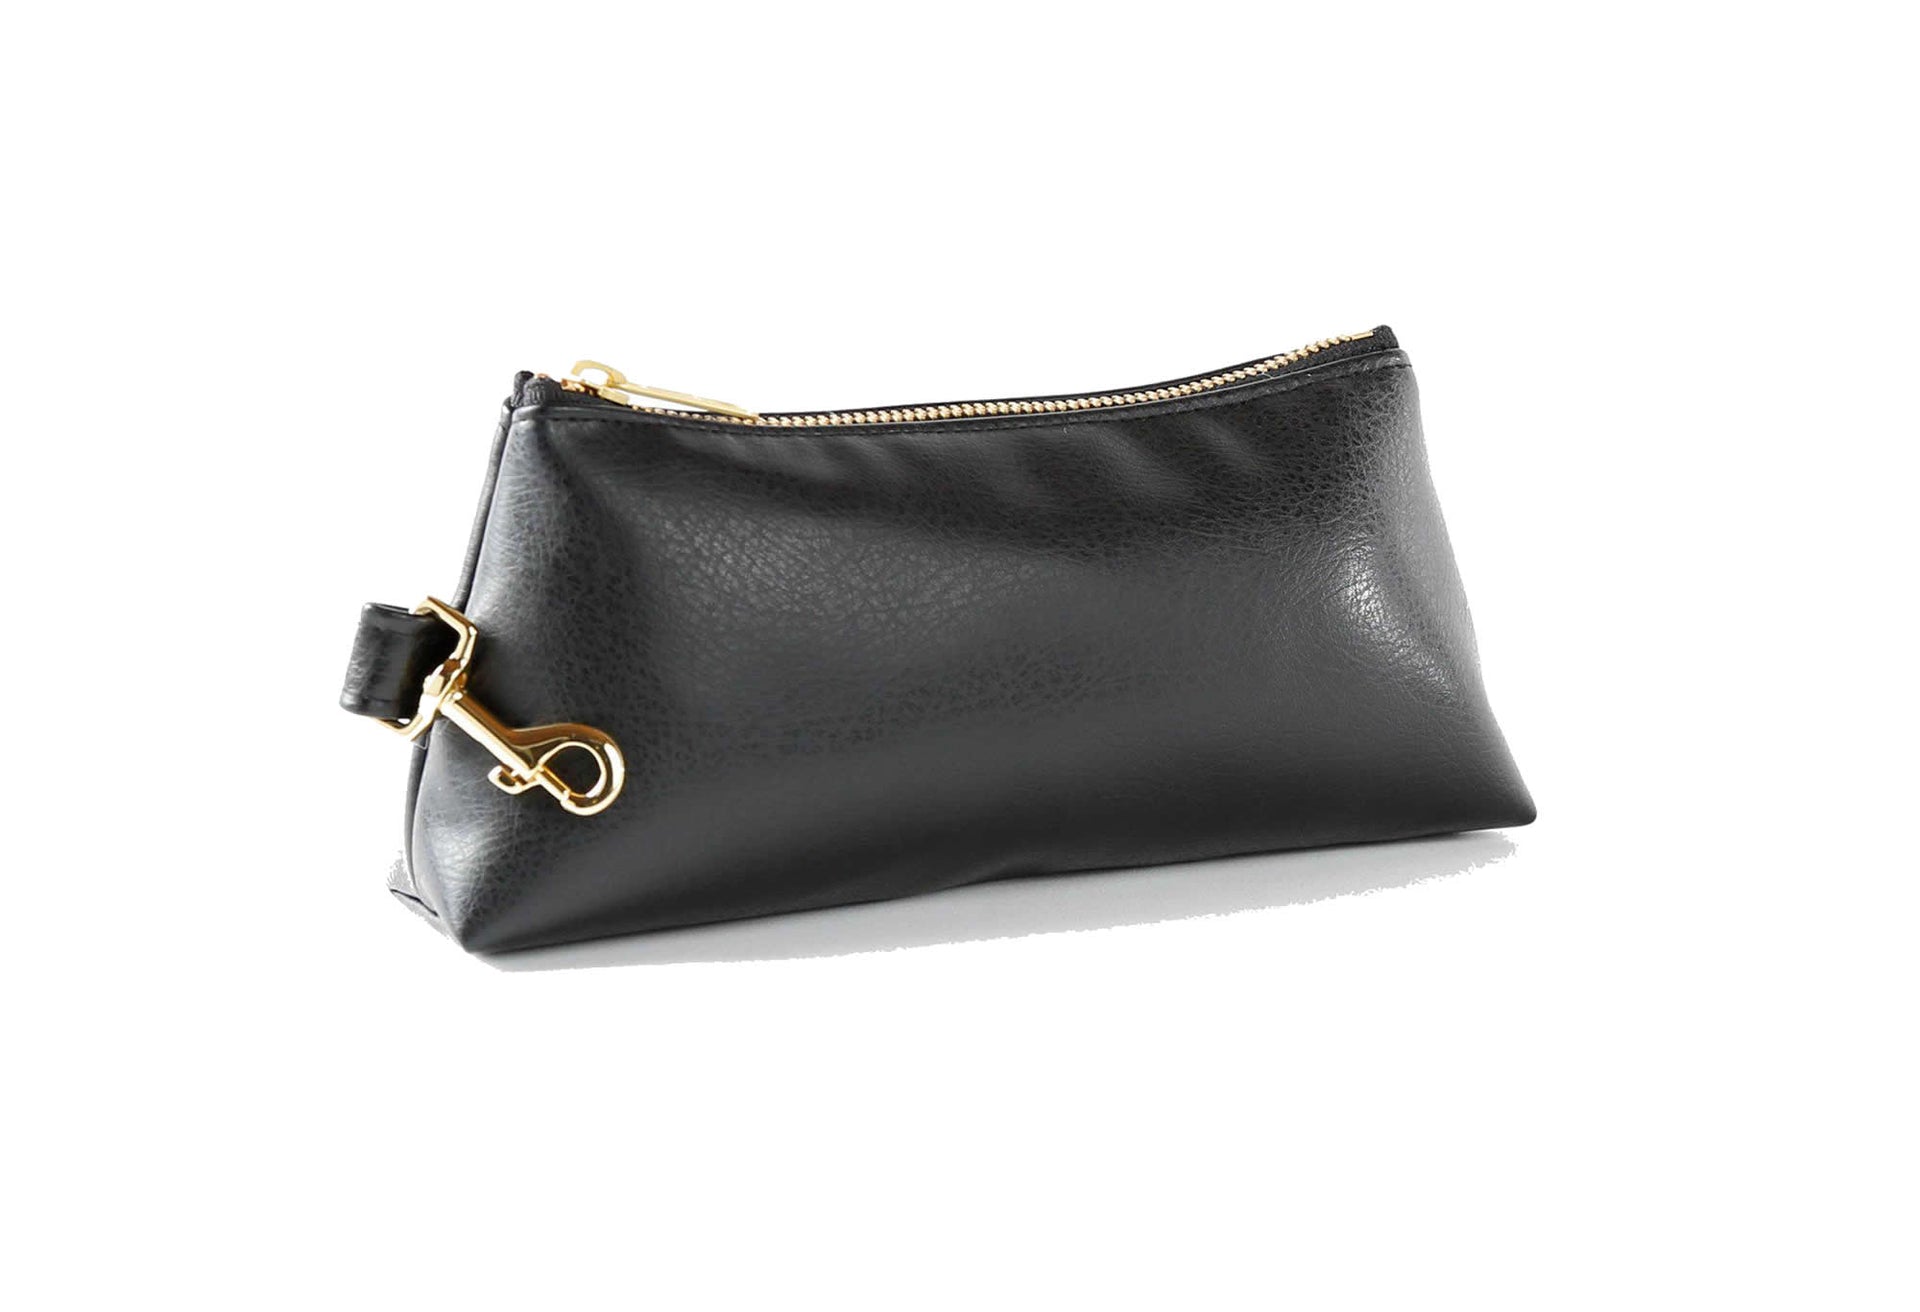 Gold Clutch Bag Leather Clutch With Wrist Strap and Zipper -  Norway